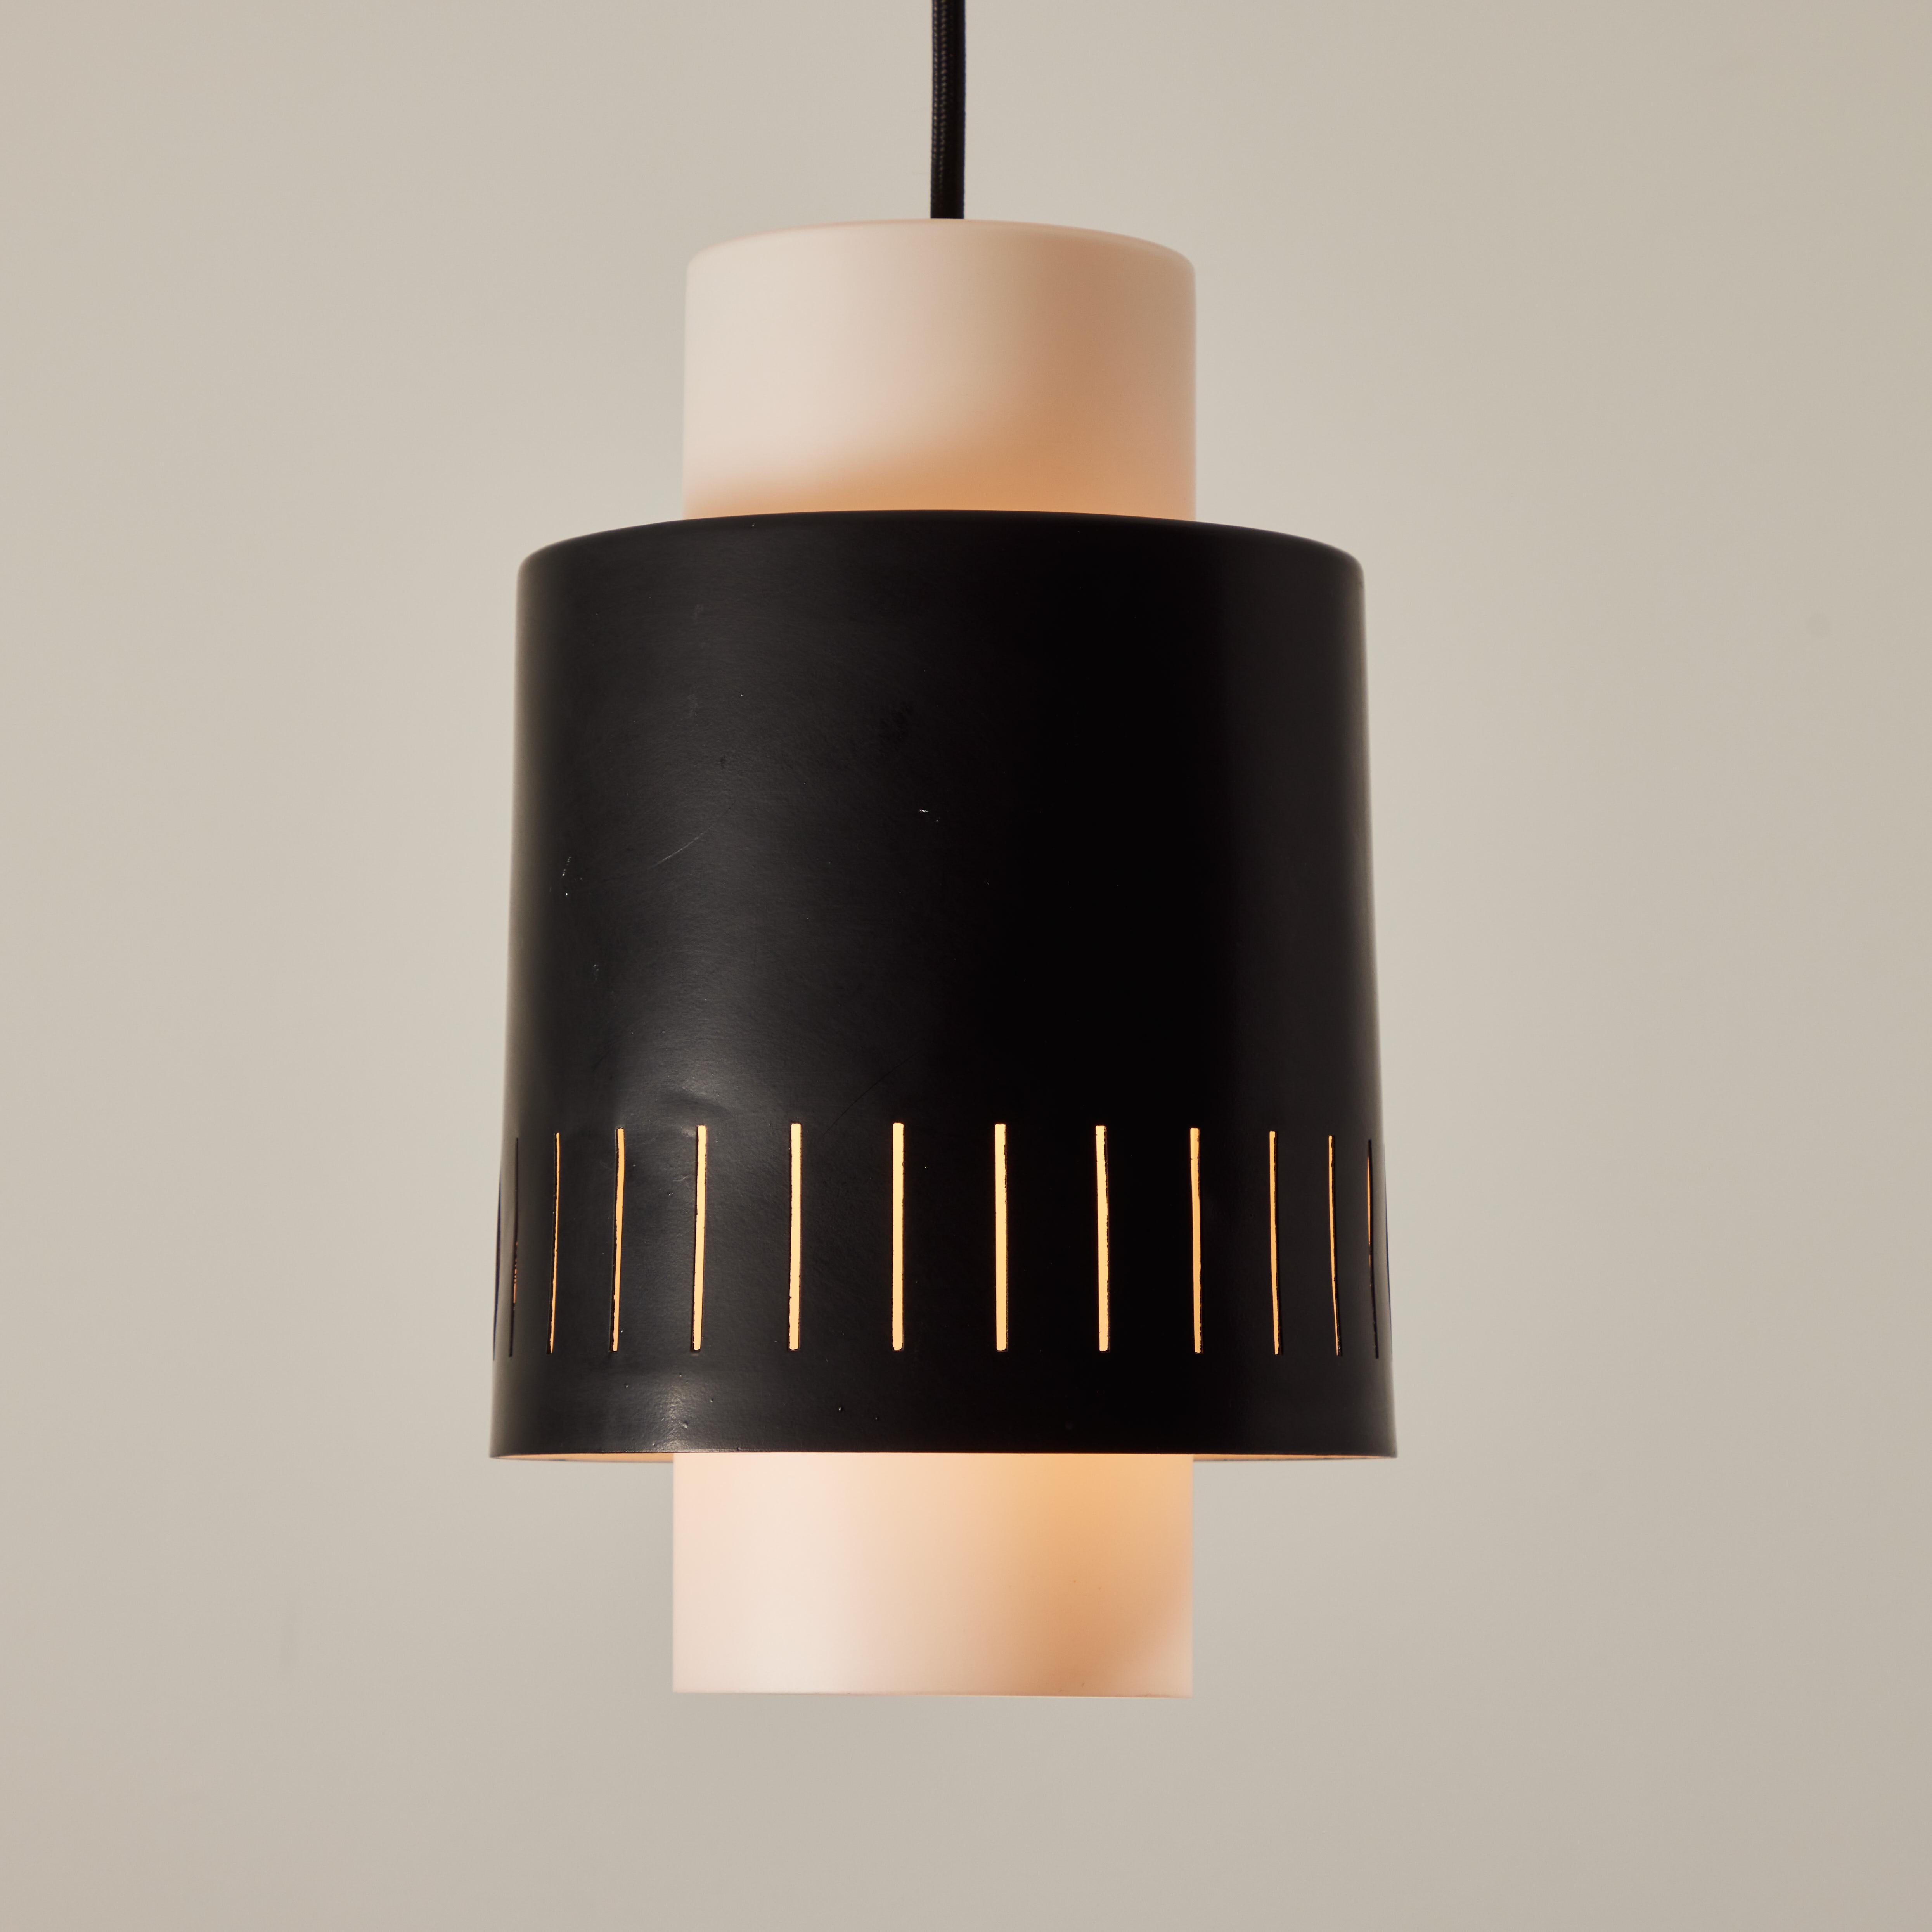 Painted 1960s Glass & Perforated Metal Pendant Attributed to Bruno Gatta for Stilnovo For Sale